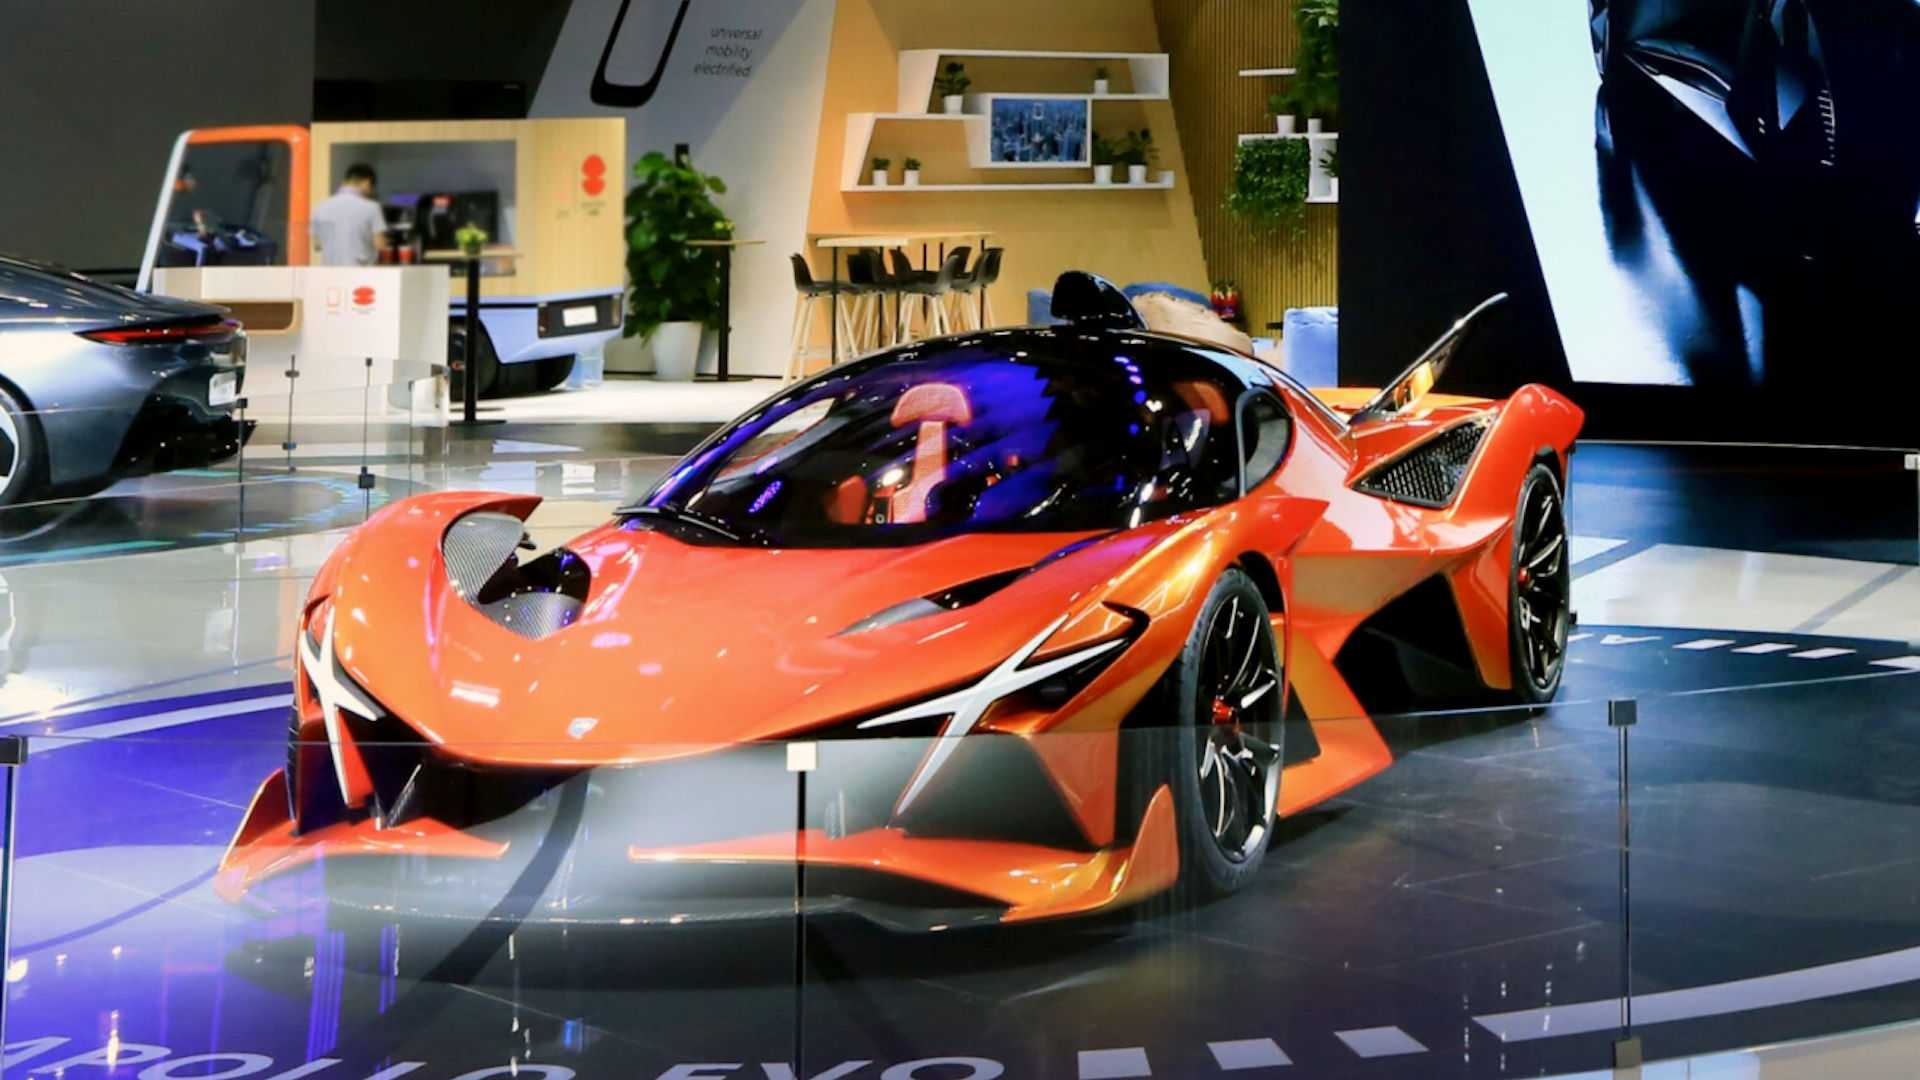 The Apollo Project Evo has been presented in China